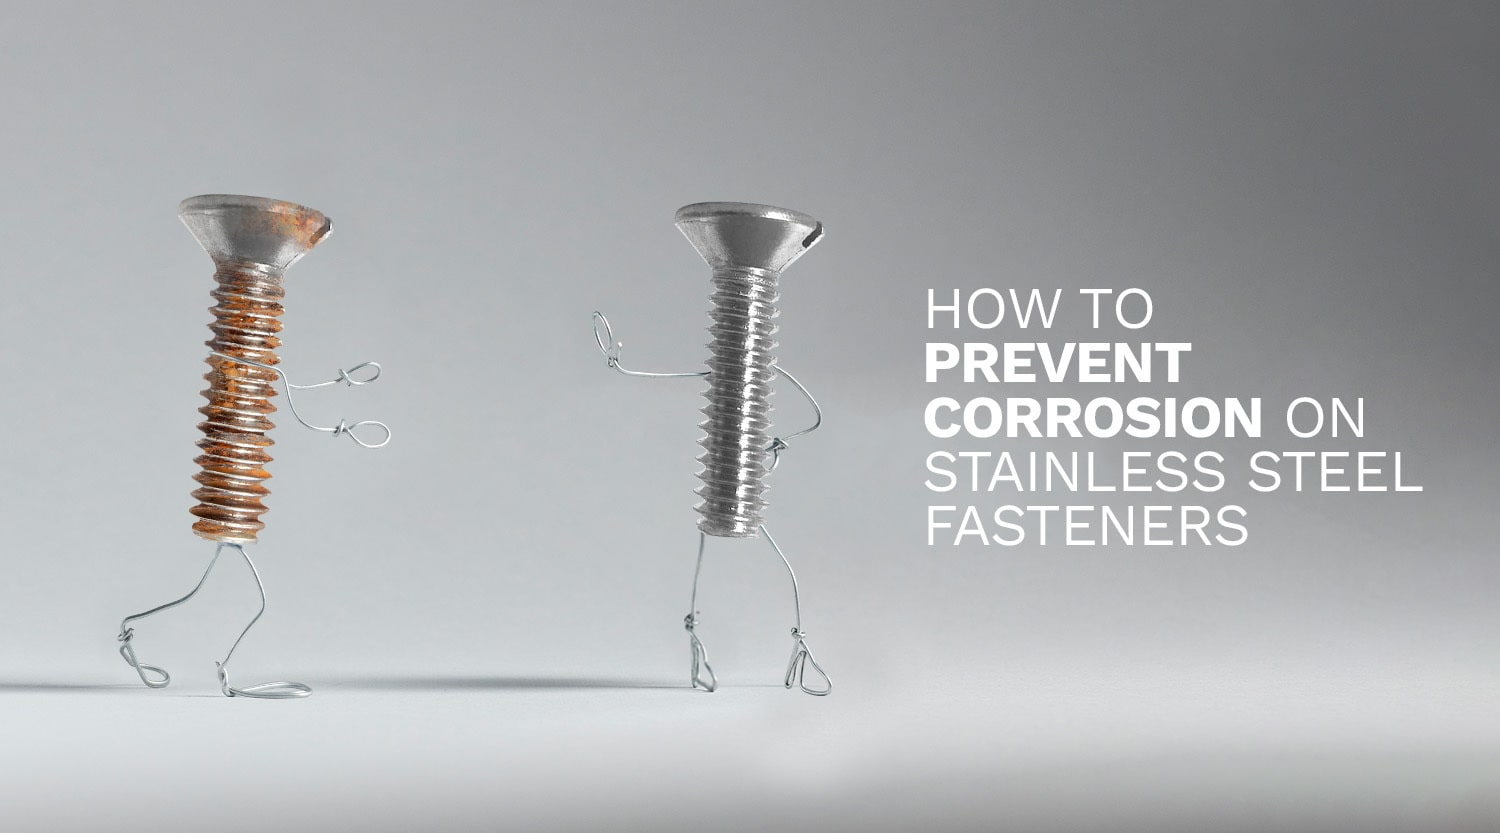 How to Prevent Corrosion on Stainless Steel Fasteners